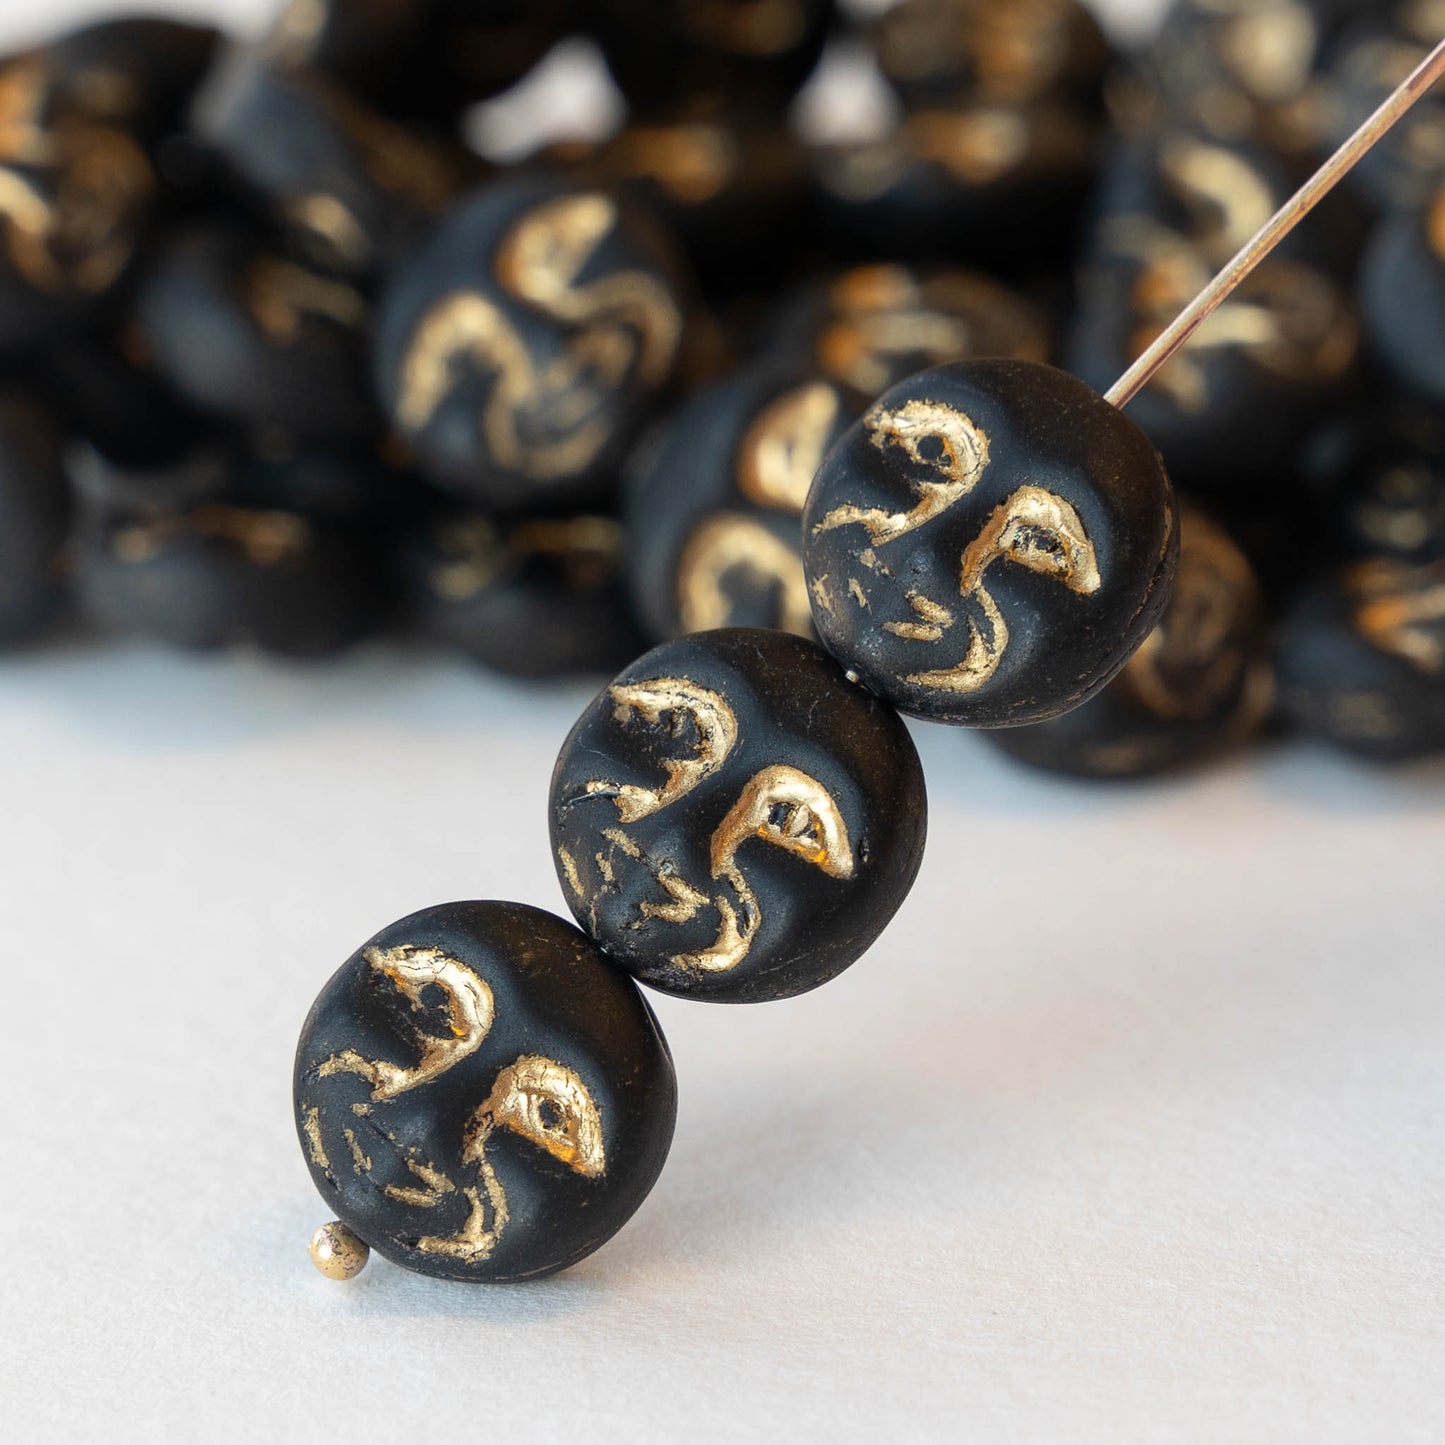 13mm Glass  Moon Coin - Black with Gold Wash - 6 beads